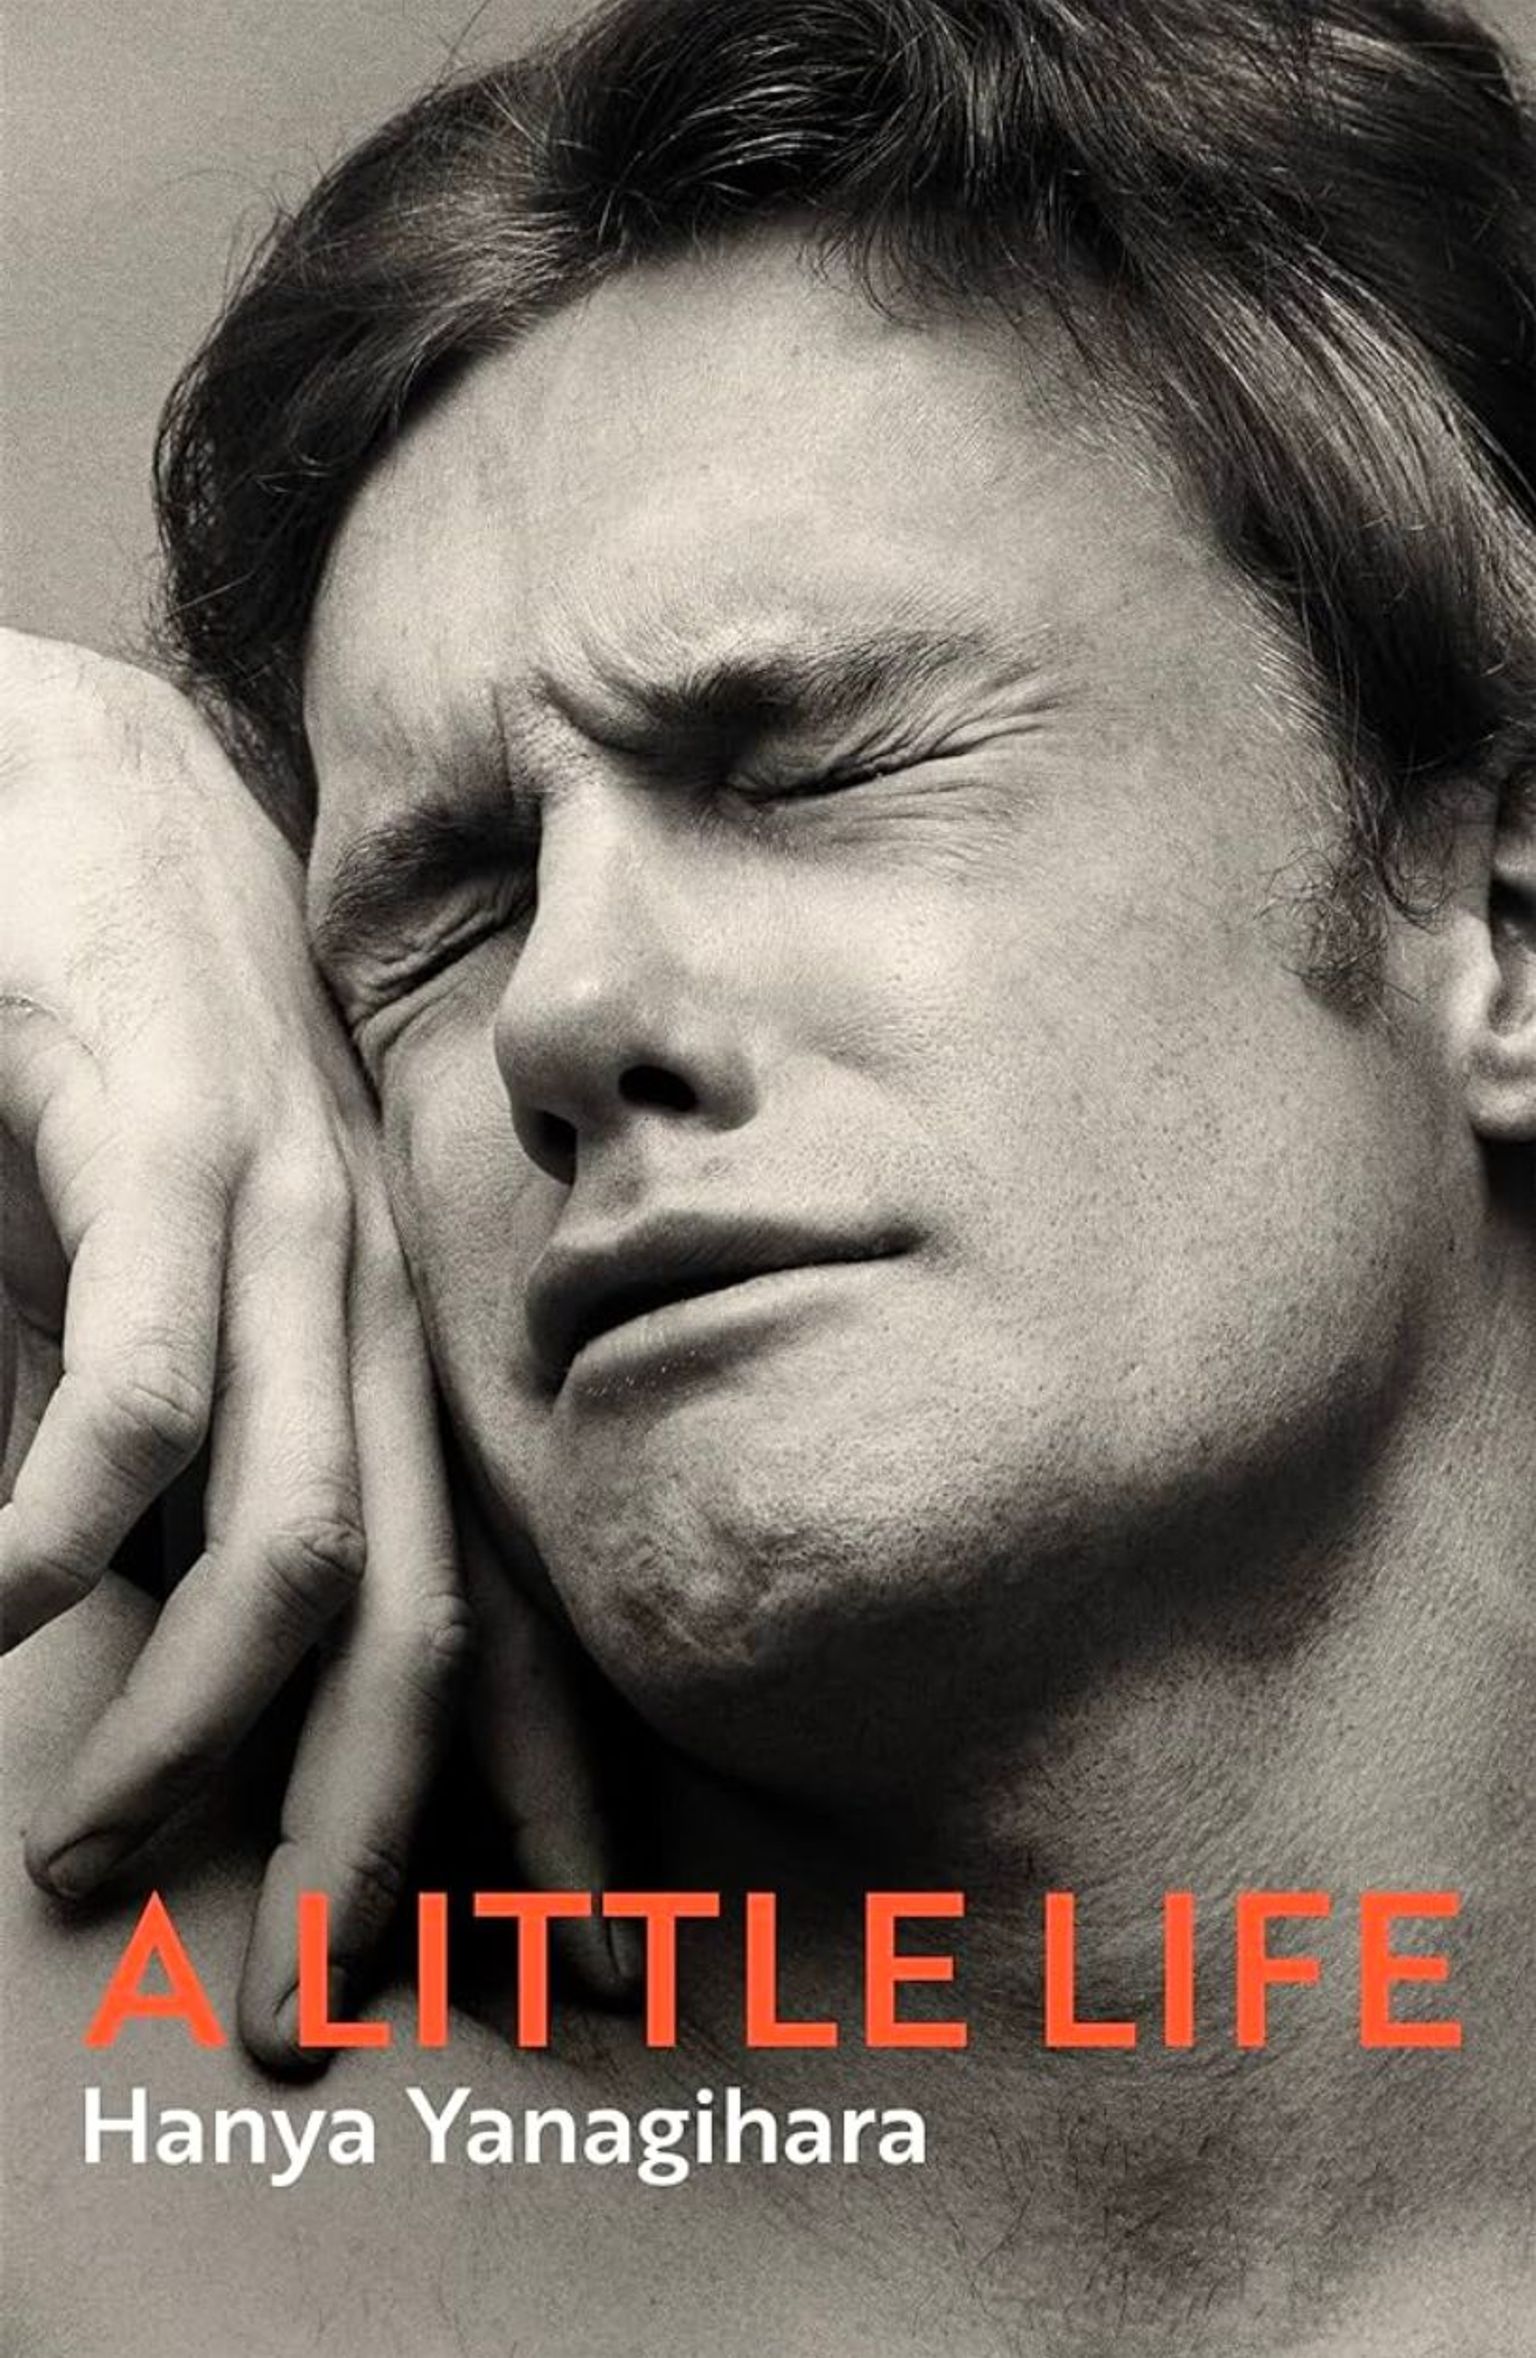 Book Recommendations - A Little Life